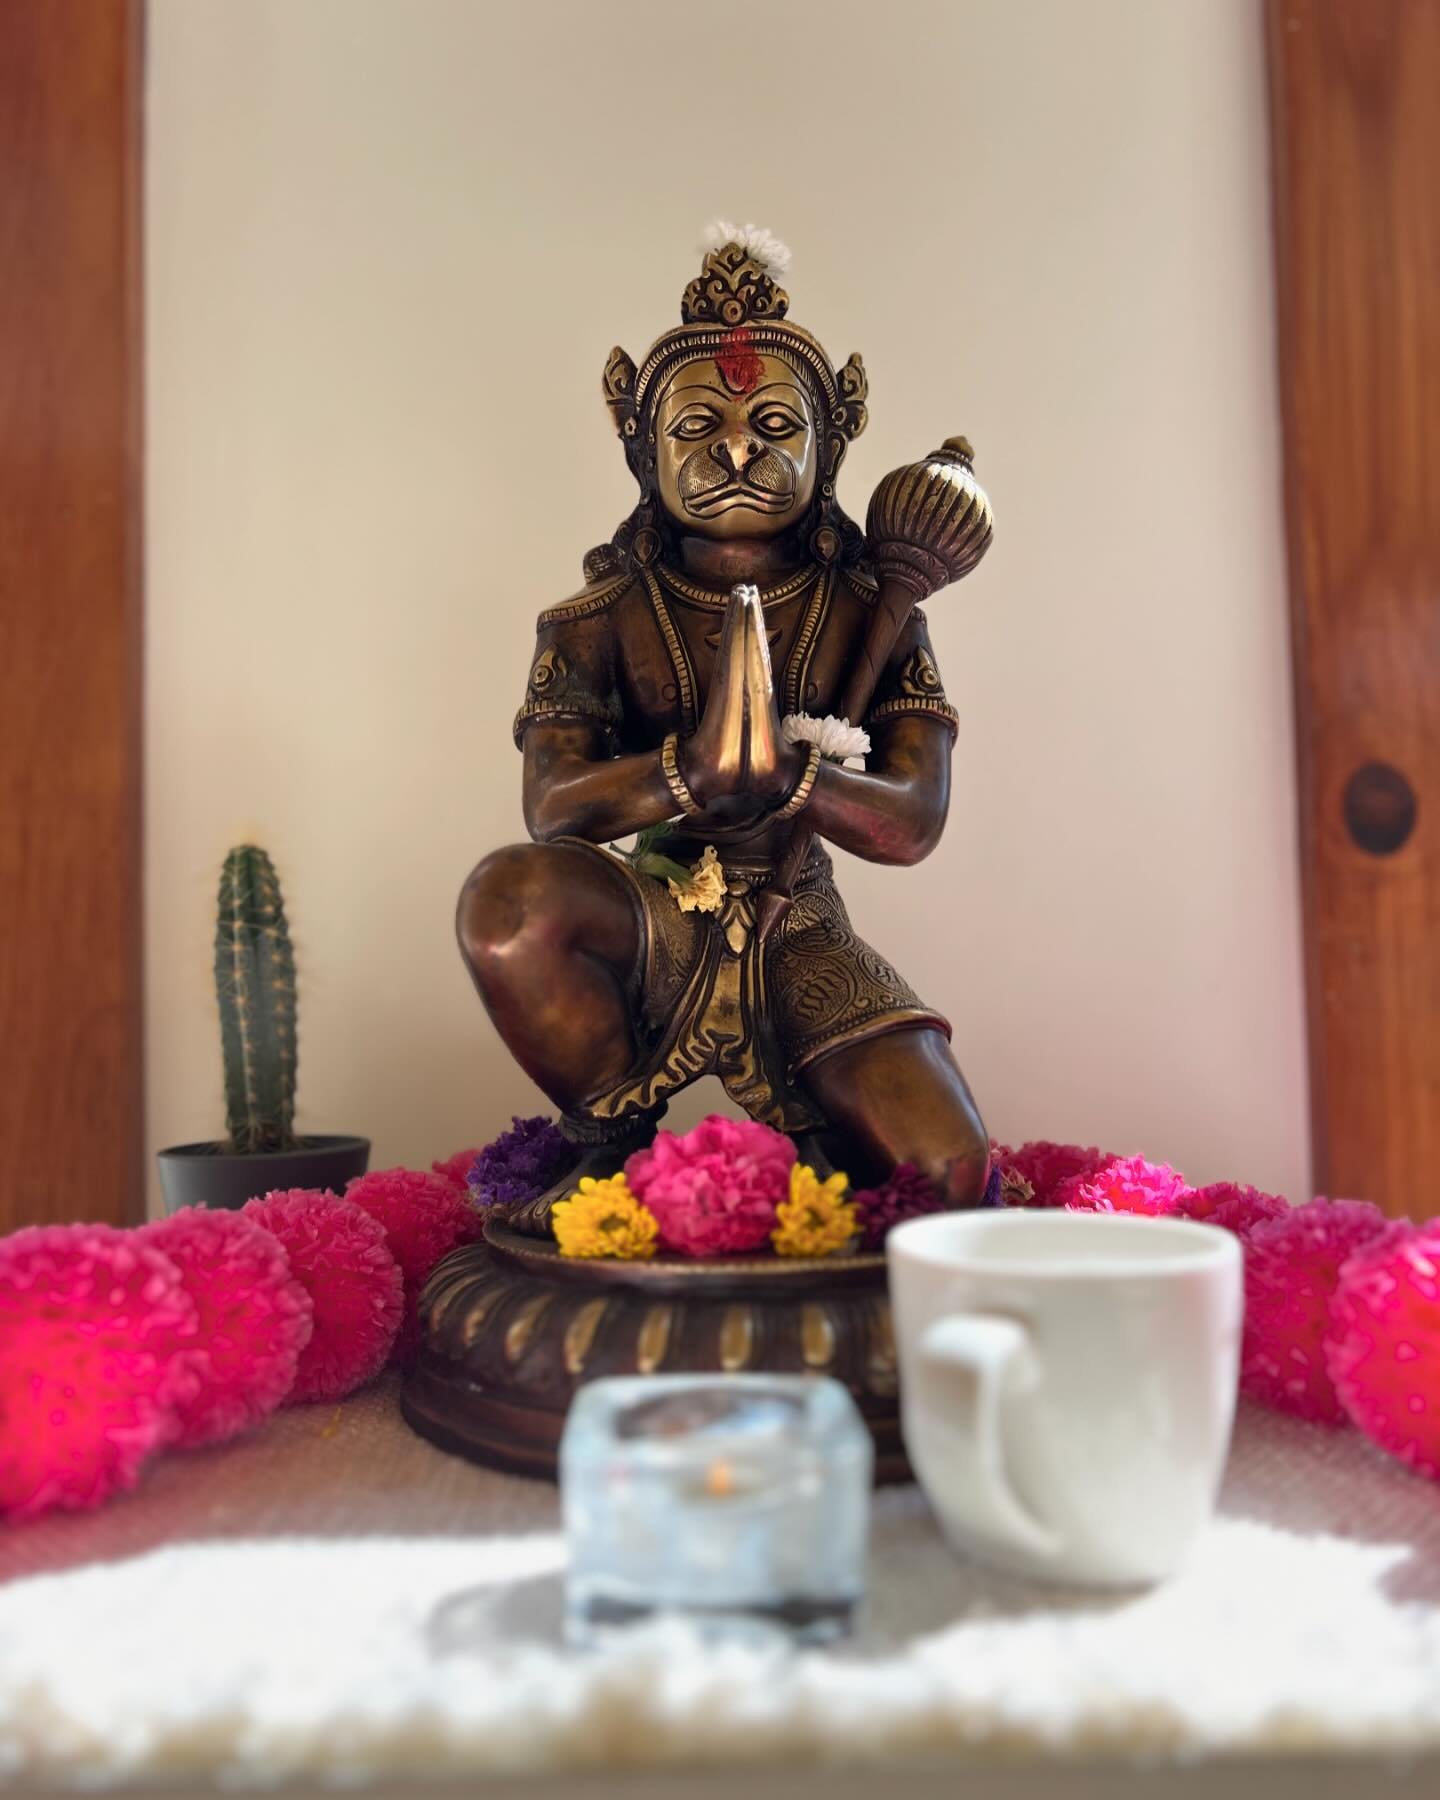 Today&rsquo;s full moon is also said to be Hanuman&rsquo;s birthday. 

Hanuman reminds us to return to the Truth of our hearts. He shows us what true devotion is and asks us to inquire to what we are devoted. 

Hanuman is intense yet humble. He devot